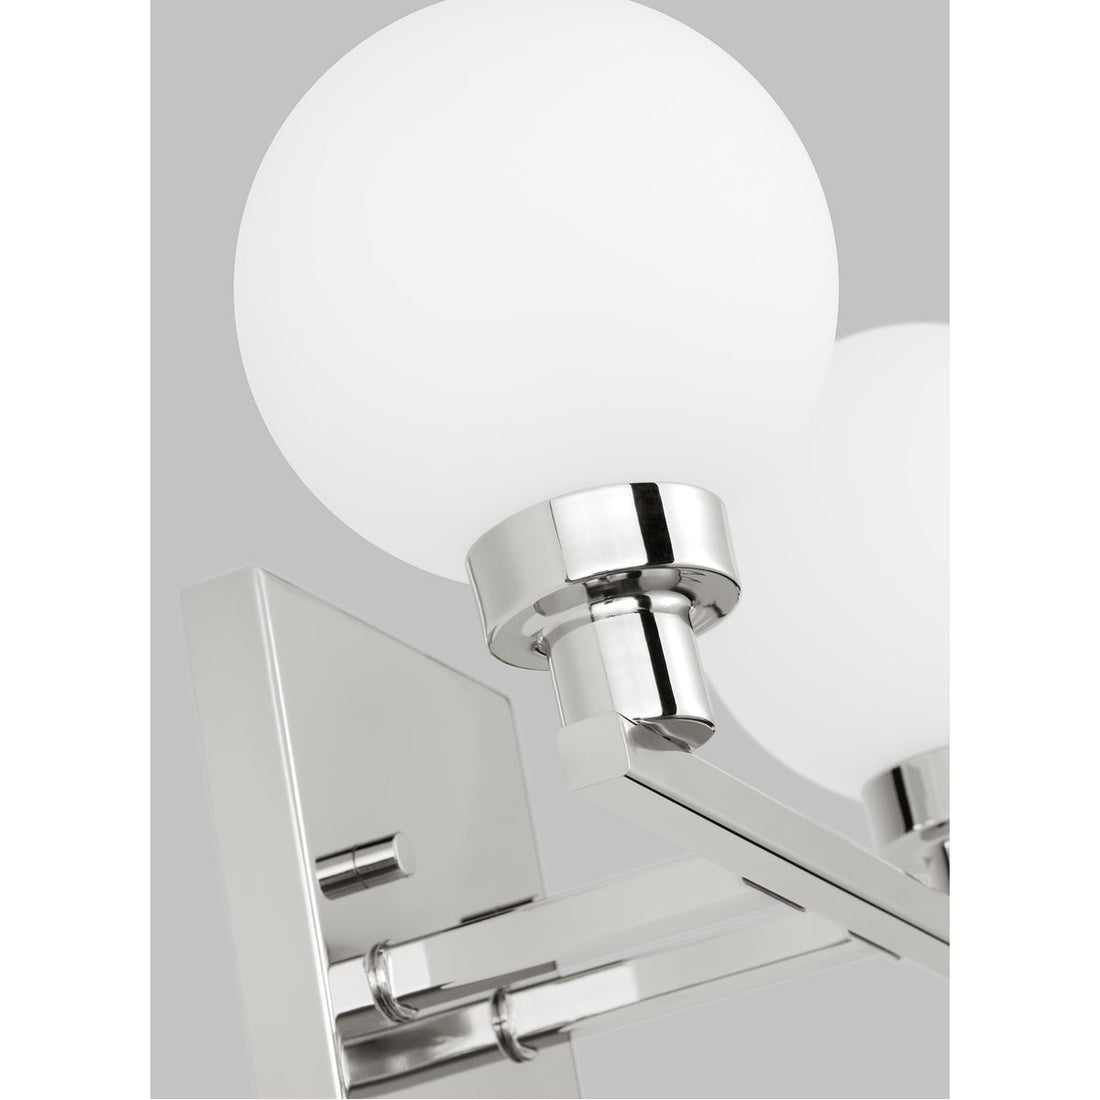 Sea Gull Lighting Clybourn 2-Light Wall/Bath Sconce without Bulb